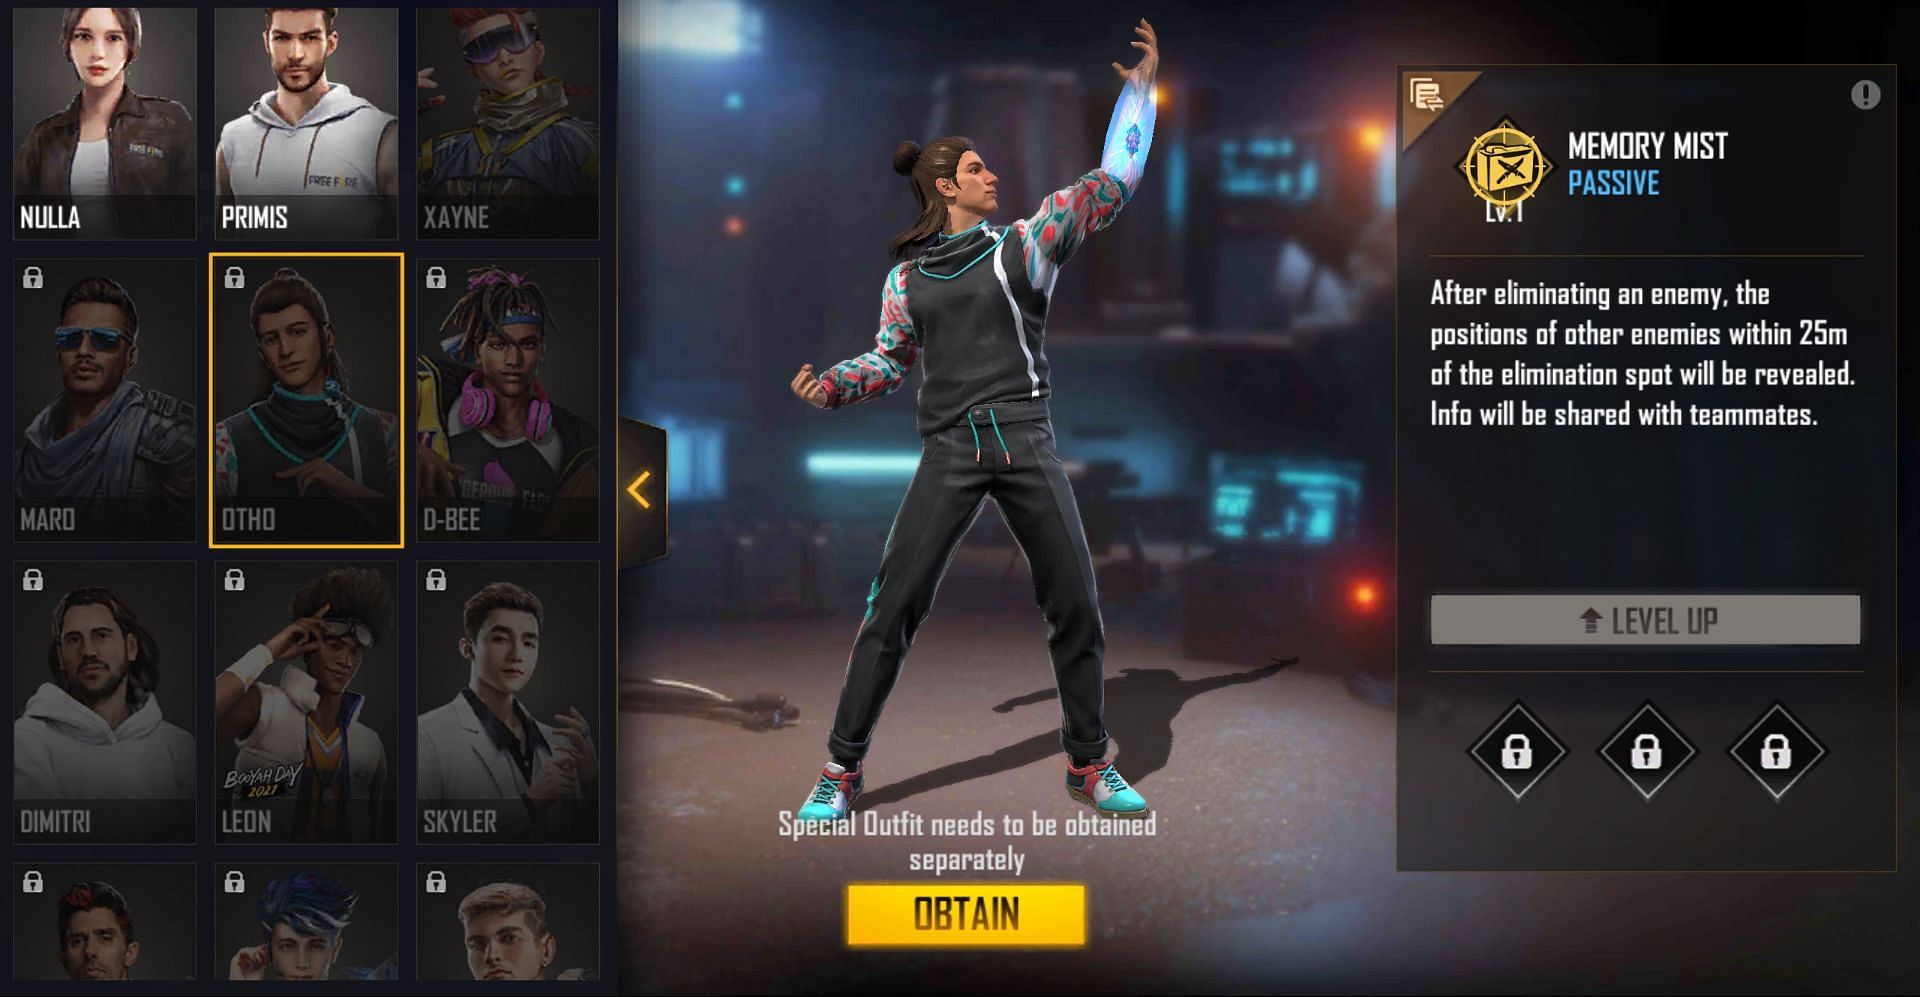 Otho possesses the &#039;Memory Mist&#039; ability in Garena Free Fire (Image via Free Fire)